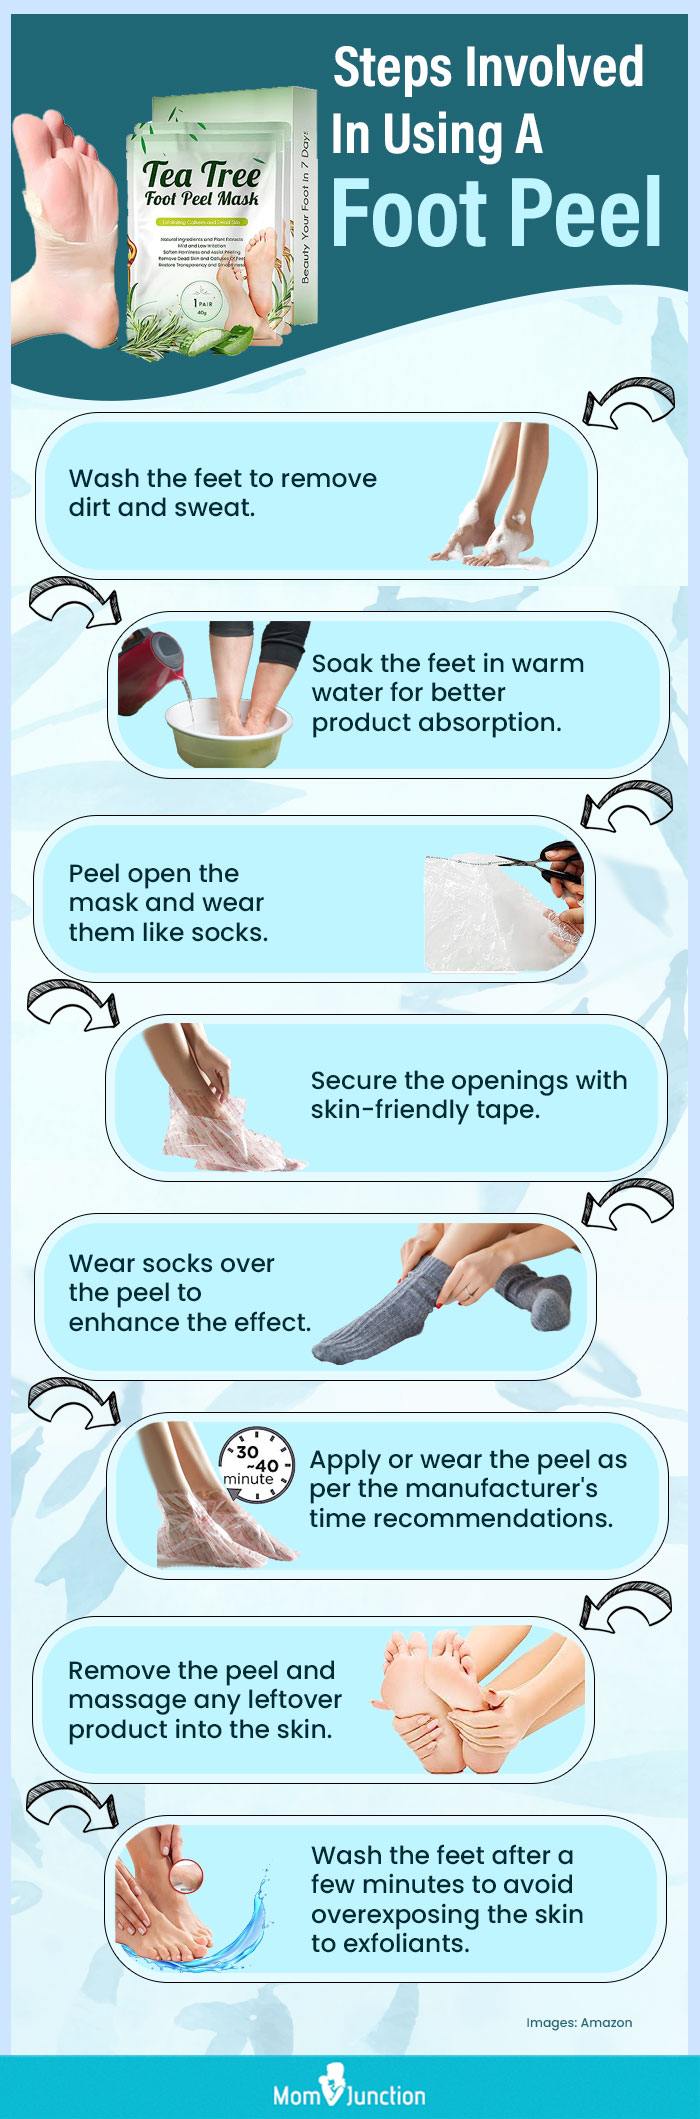 Steps Involved In Using A Foot Peel (infographic)